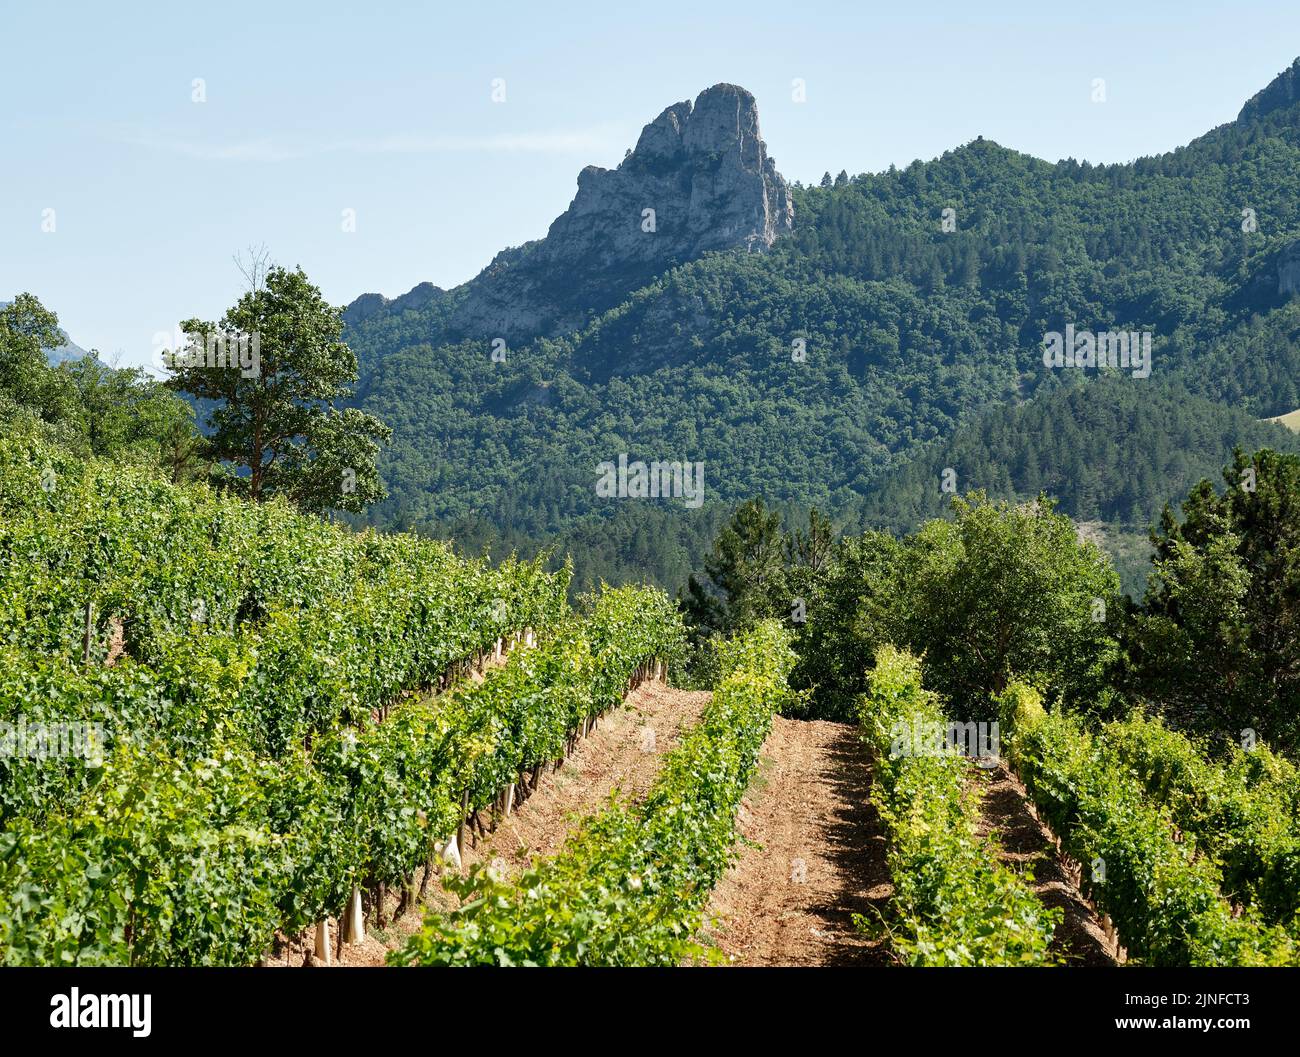 A vineyard of Clairette grapes on the north slope of the Roanne Valley near St-Benoit-en-Diois. The peak behind is L'Aiguille (The Needle) Stock Photo